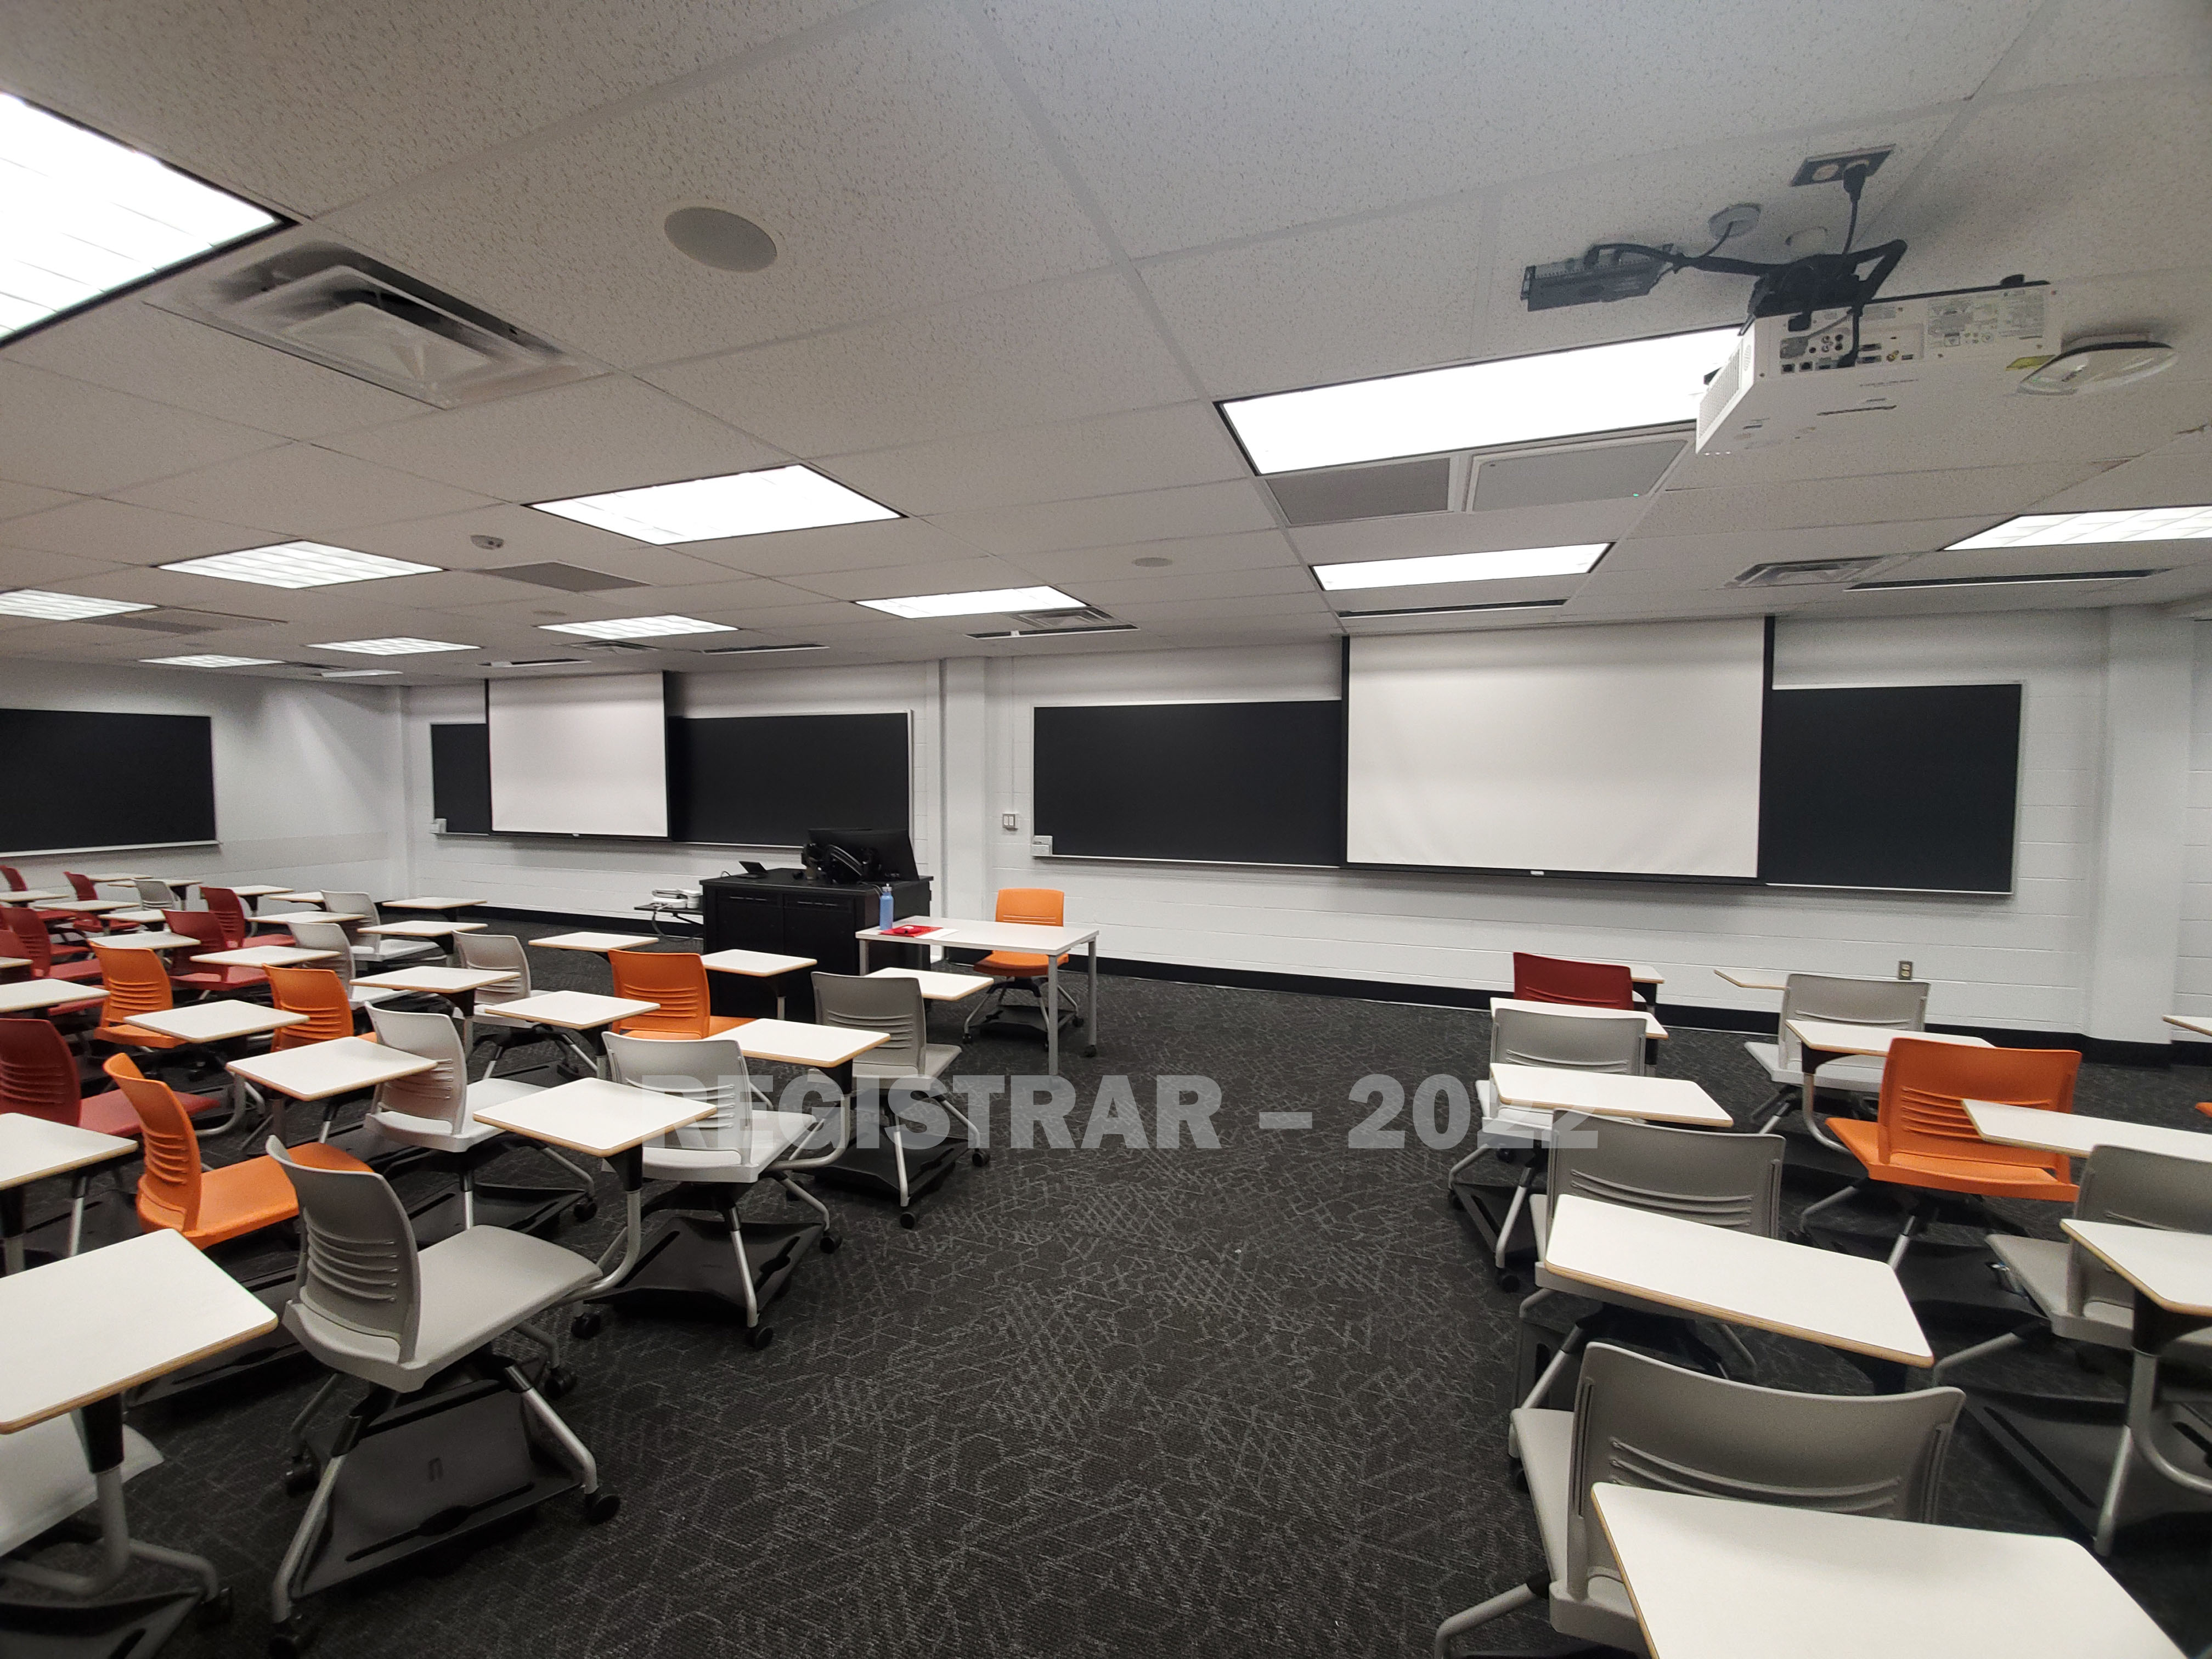 Journalism Building room 270 ultra wide angle view from the back of the room with projector screen down